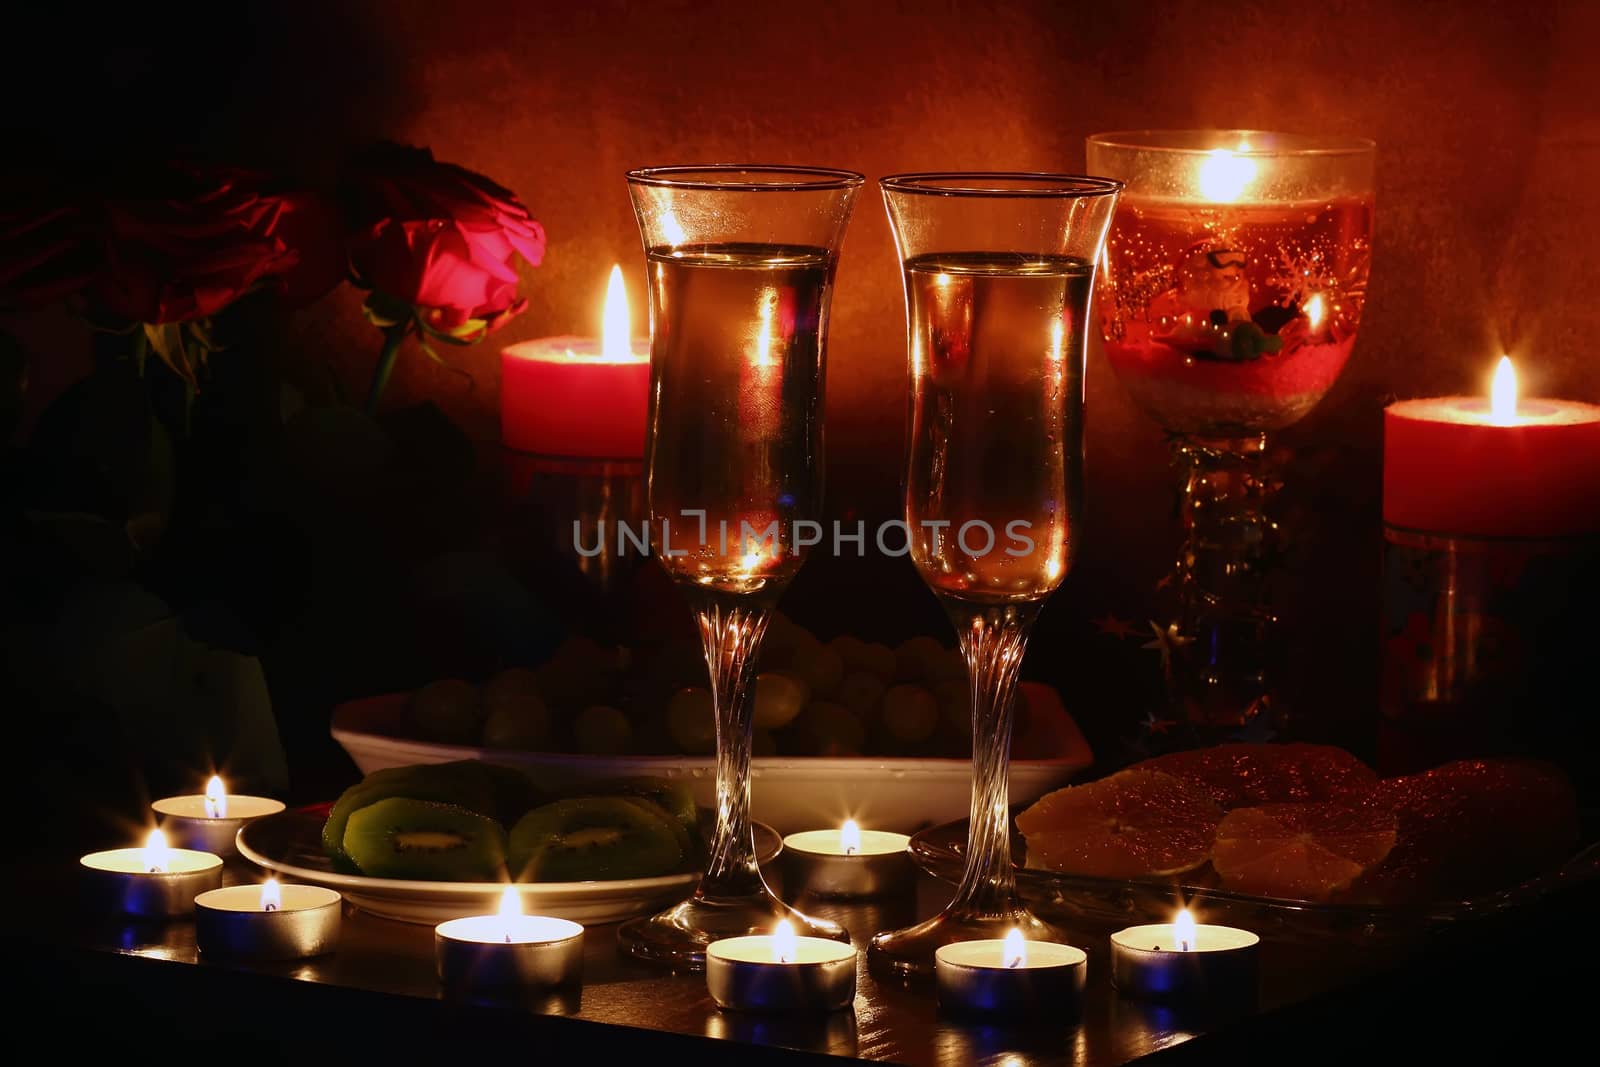 Champagne, fruit, candles and a romantic evening 